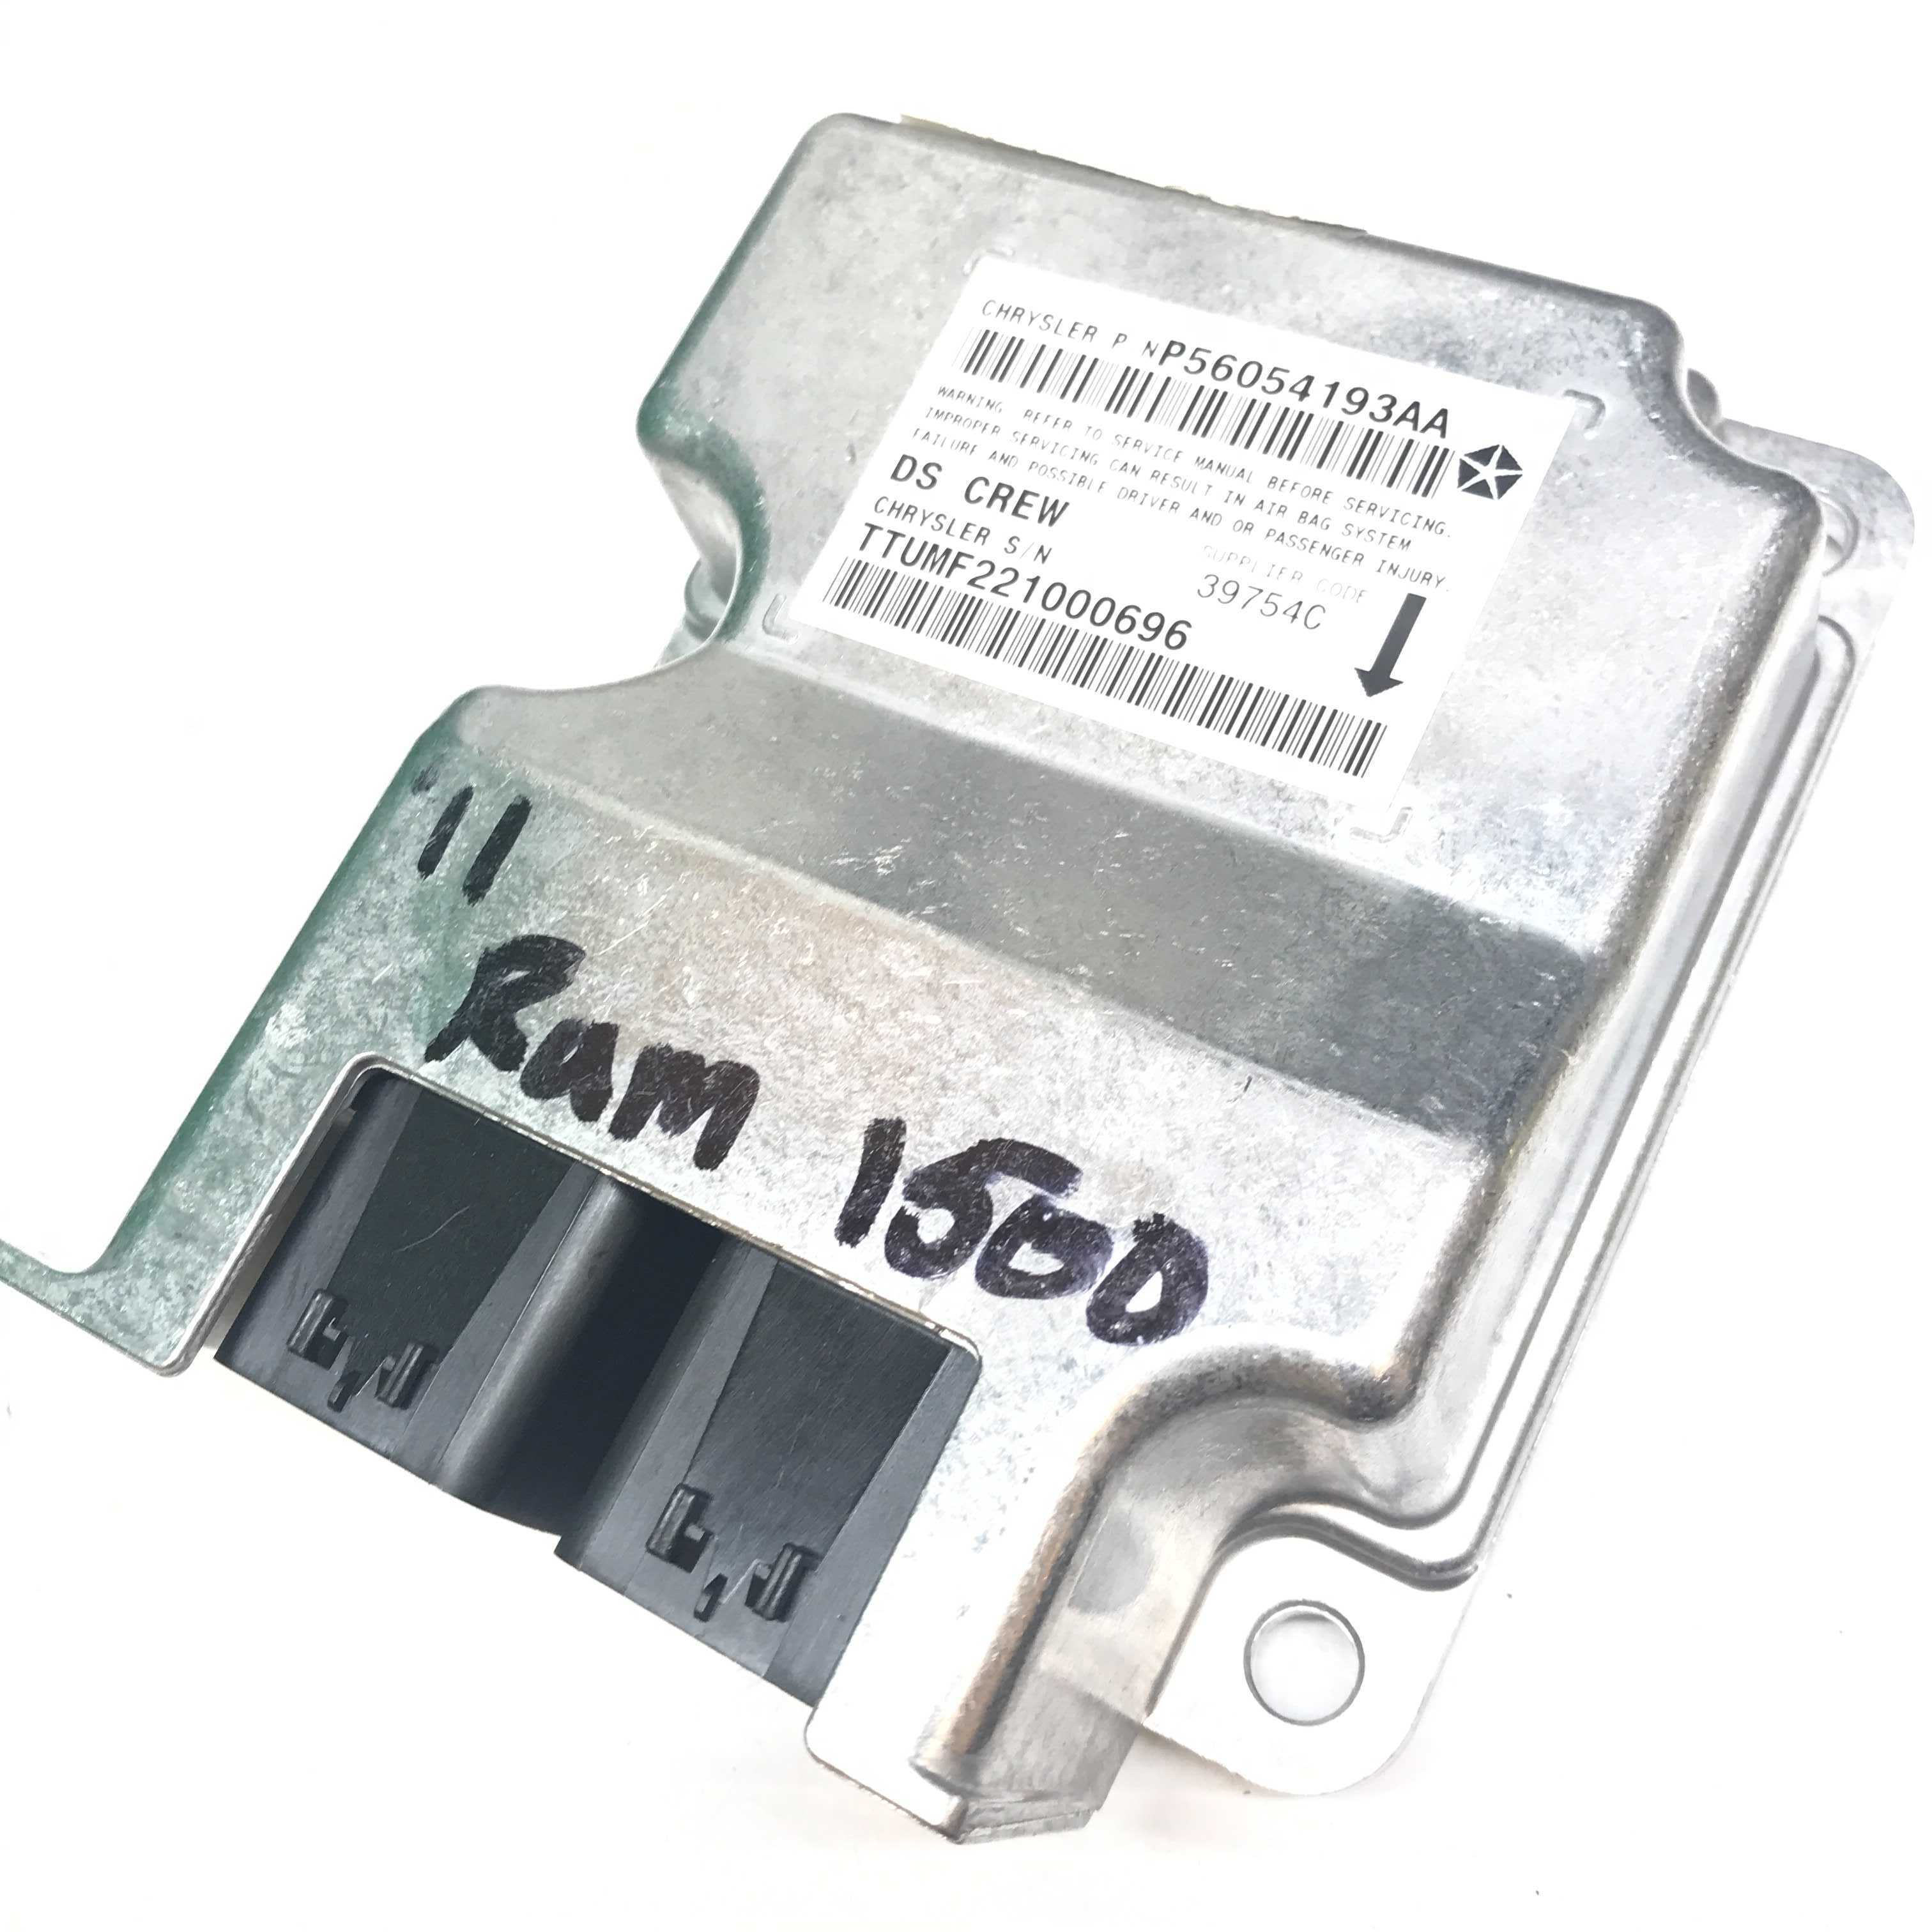 DODGE 1500 SRS ORC ORM Occupant Control Module - Airbag Computer Control Module PART #P56054193AA